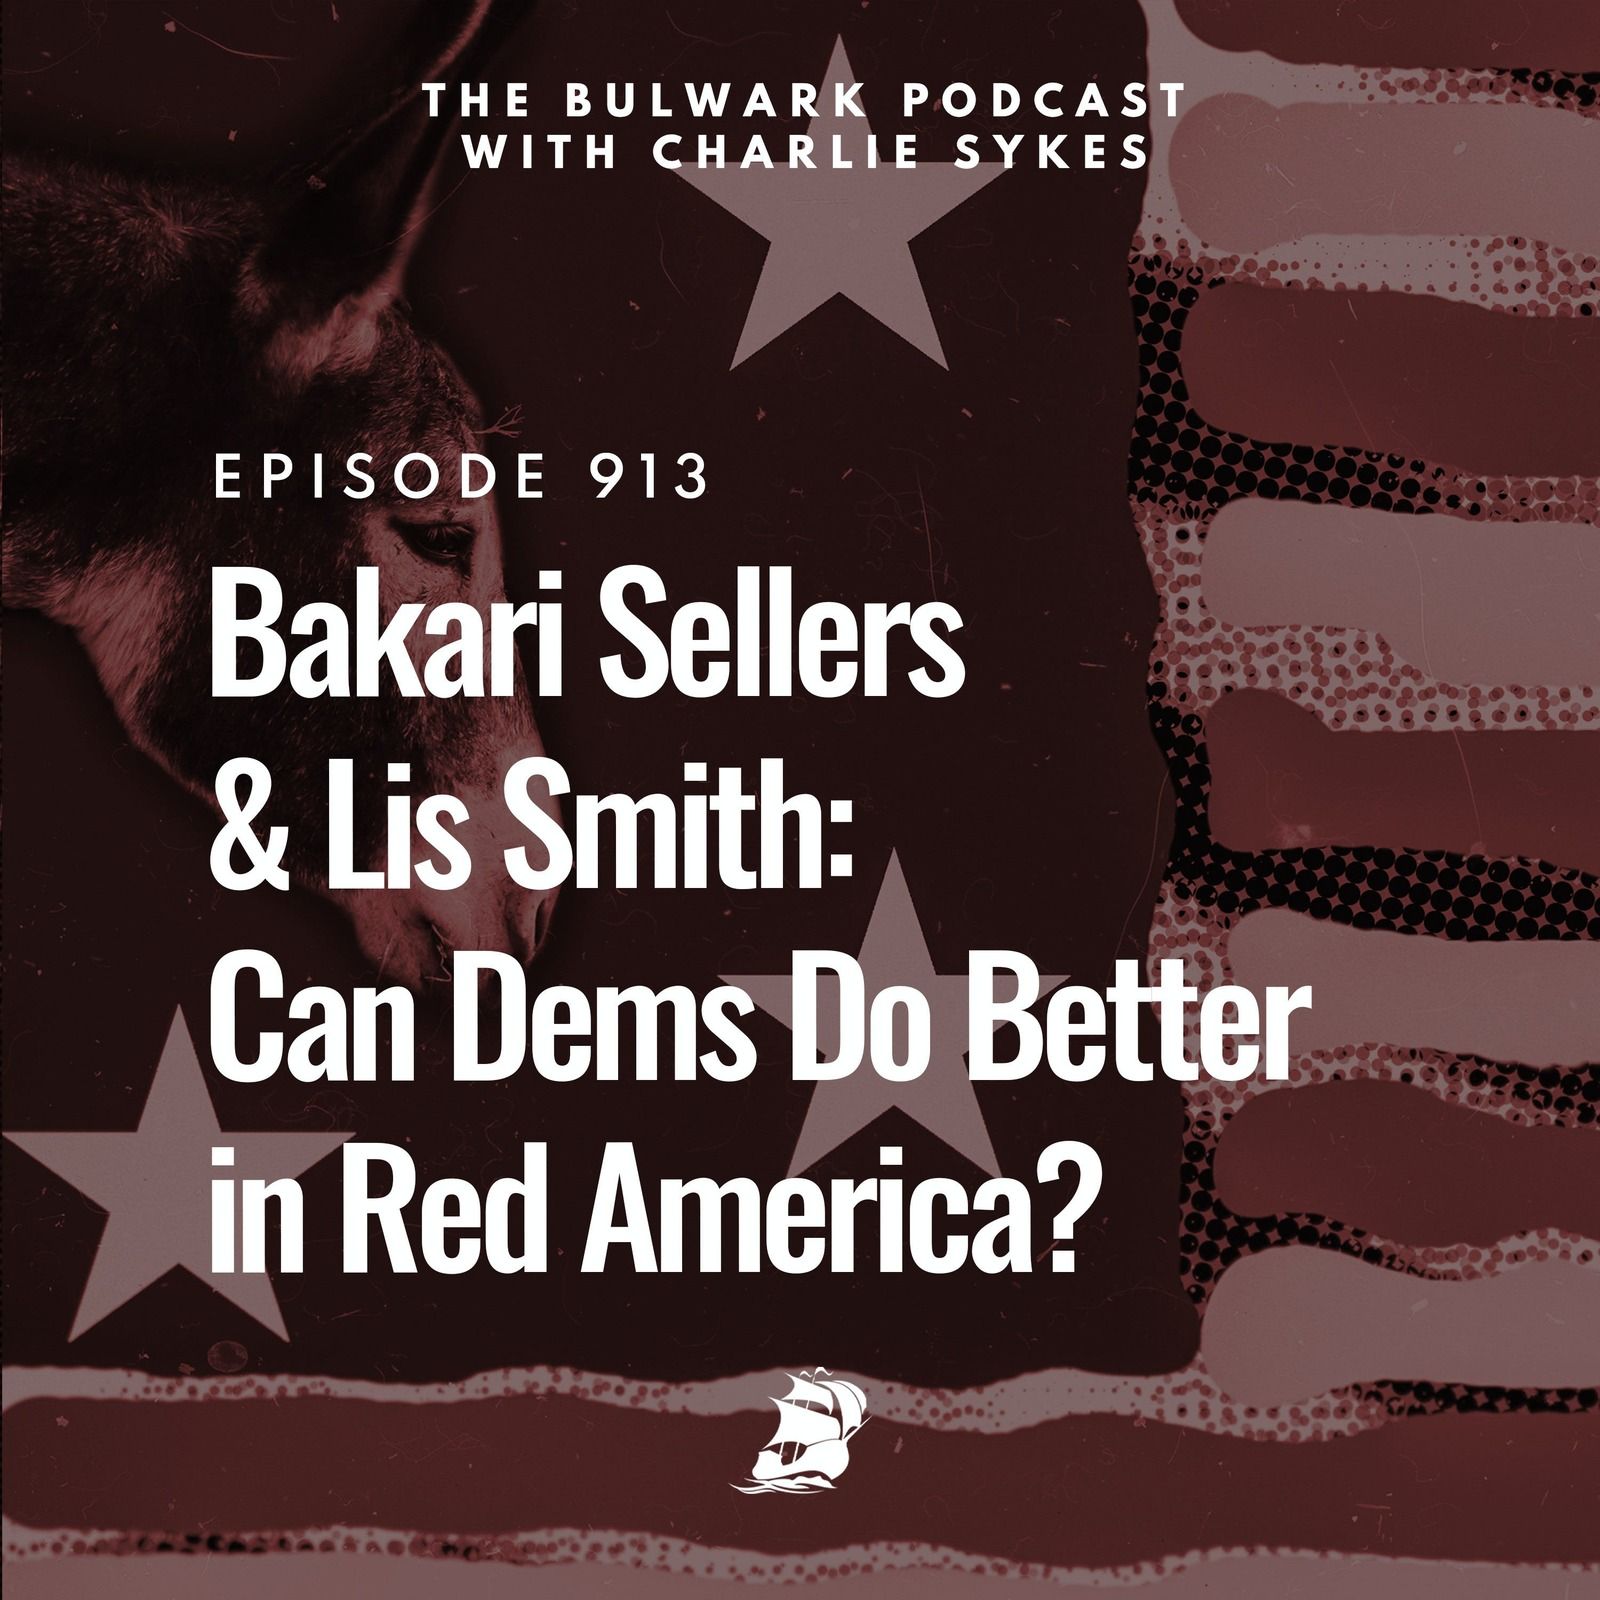 Bakari Sellers & Lis Smith: Can Dems Do Better in Red America? by The Bulwark Podcast